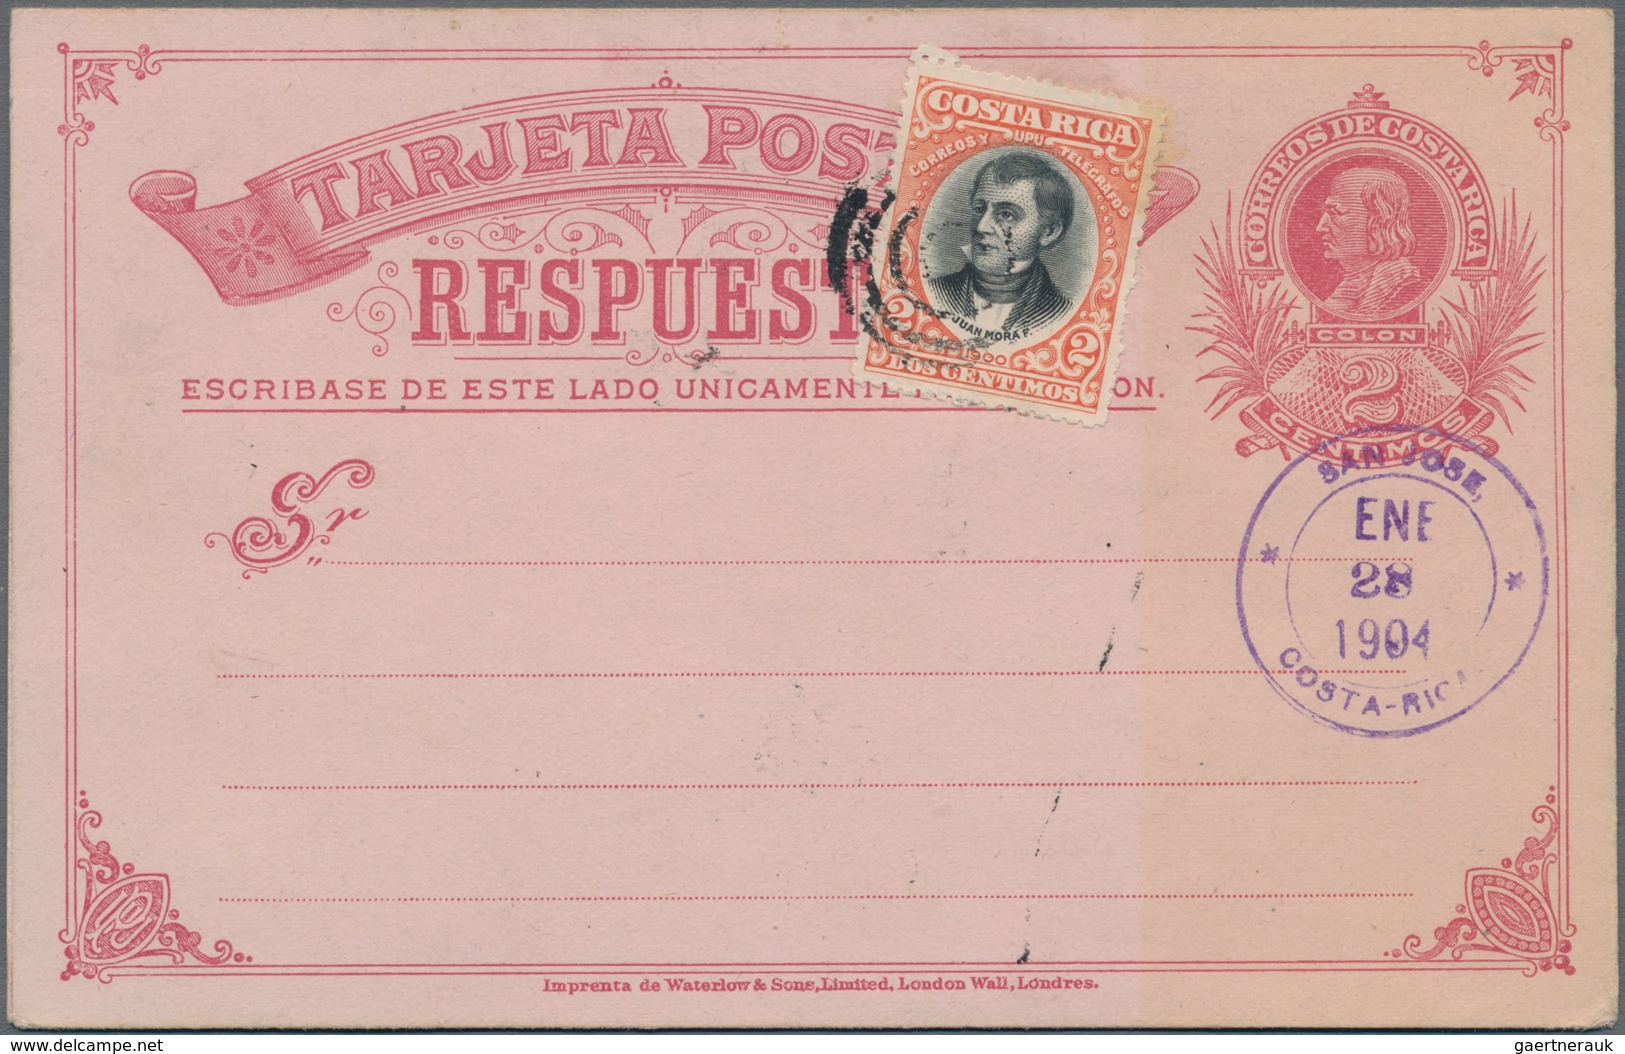 Costa Rica: 1903, Stationery Double Card 2 C Uprated 2 C Sent From "SAN JOSE ENE 28 1904" To Berlin - Costa Rica